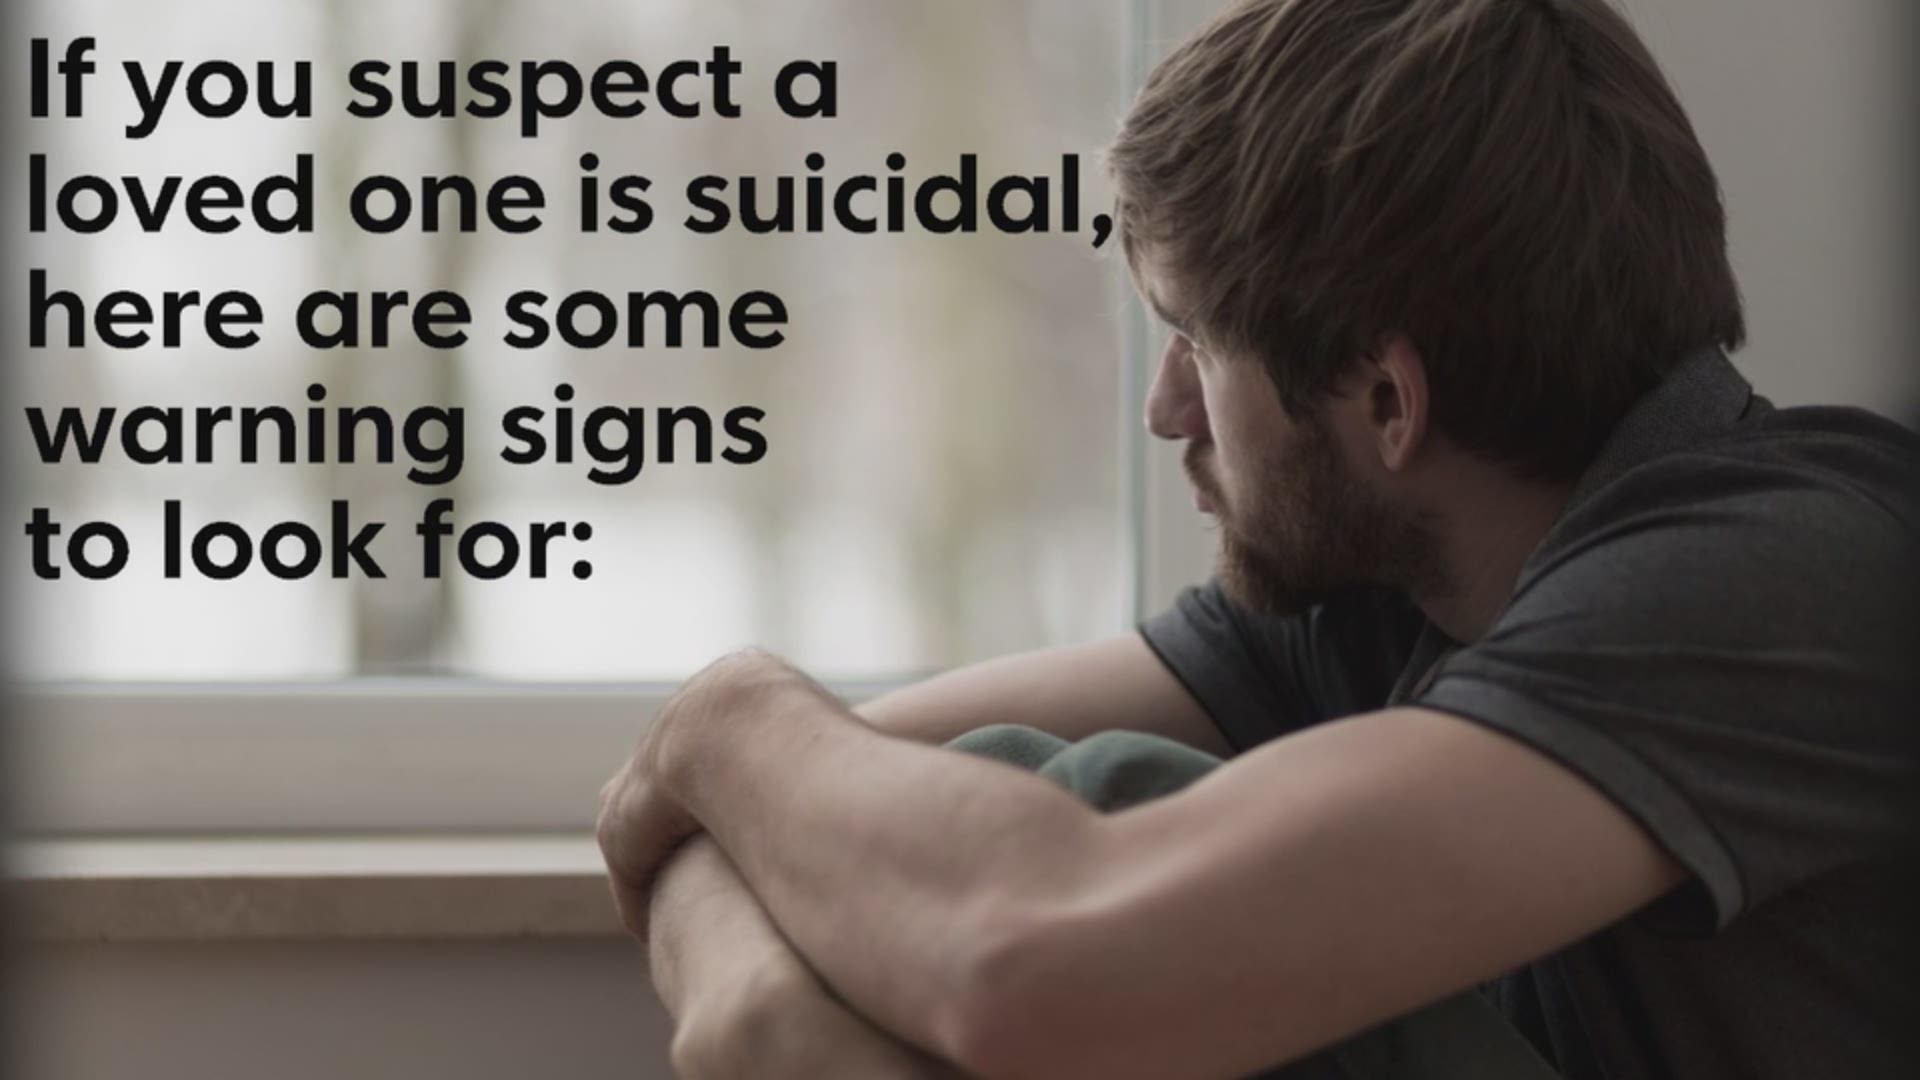 Watch for these warning signs if you suspect a loved one might be suicidal. USA TODAY NETWORK